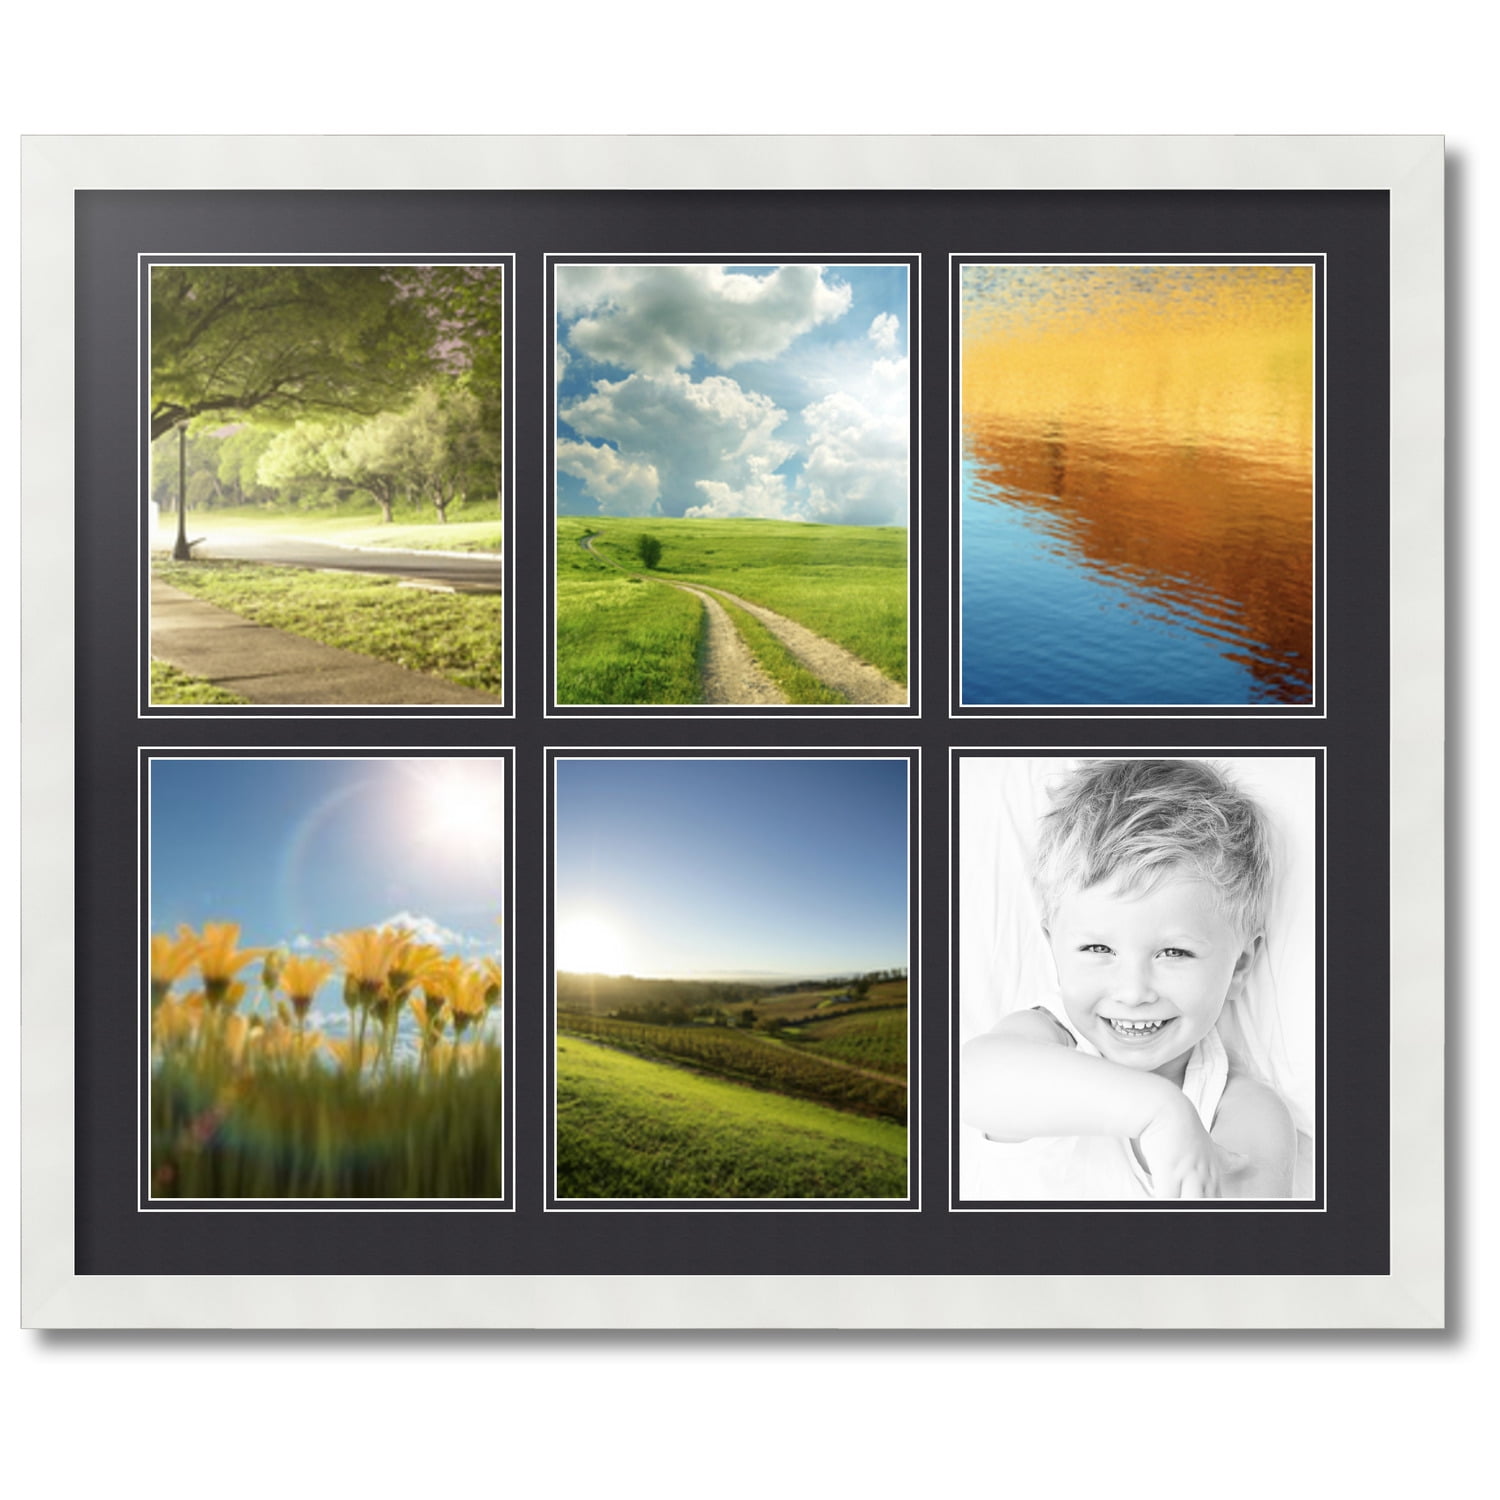 DEEPLAY 8X10 Picture Frames Set of 6, Ocean Seascape Photo Frames Classic  Display Pictures High Definition Plexiglass Collage Photo Frame for Table